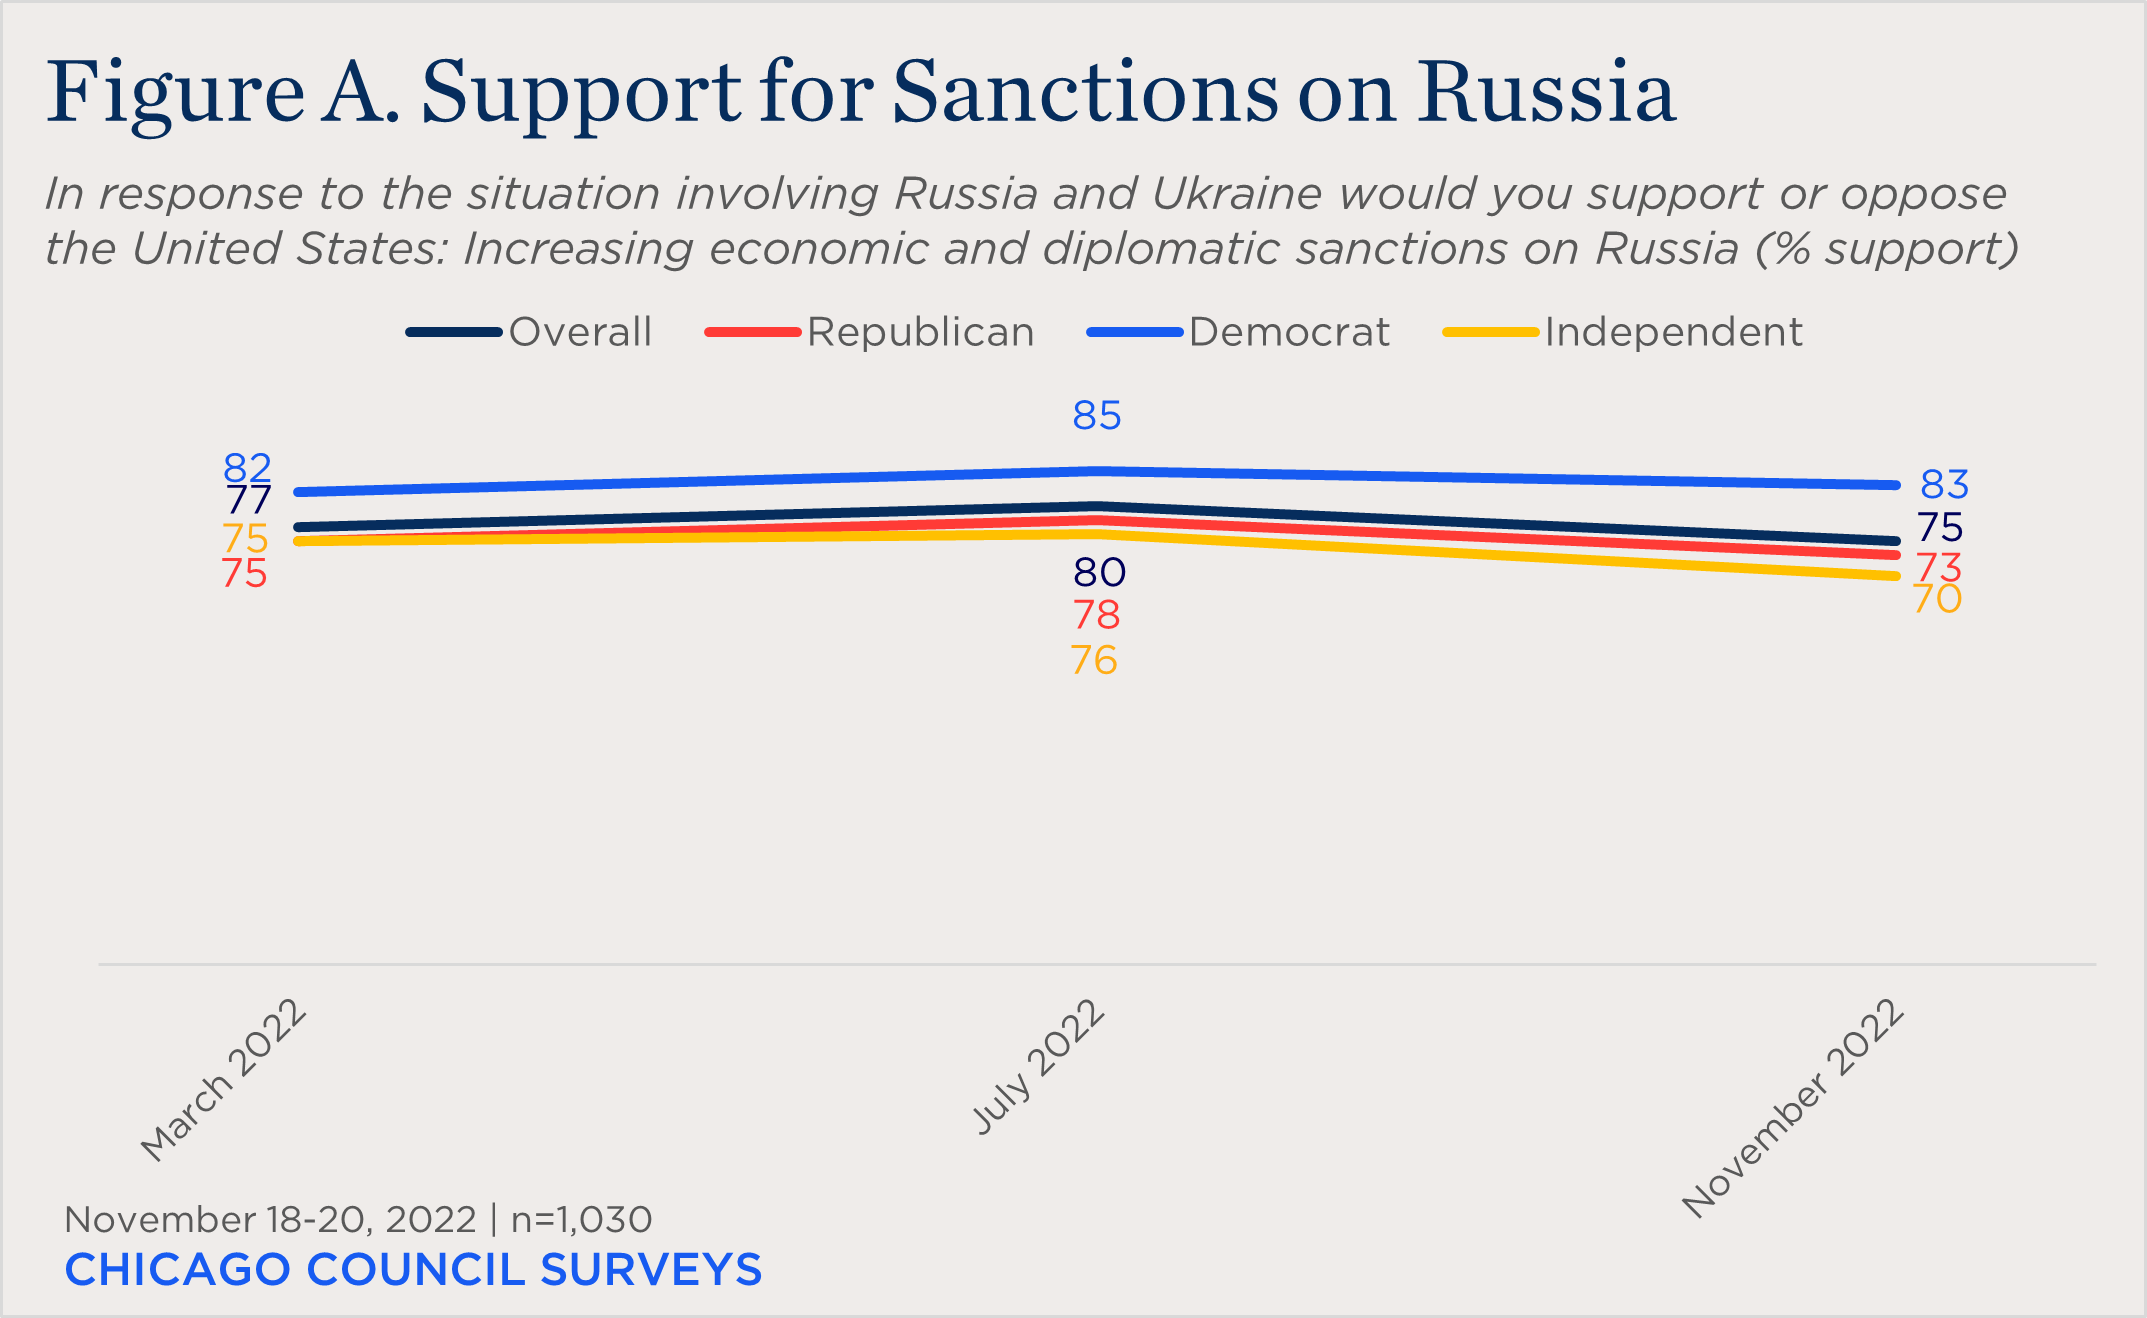 "line chart showing partisan support for sanctions on Russia"